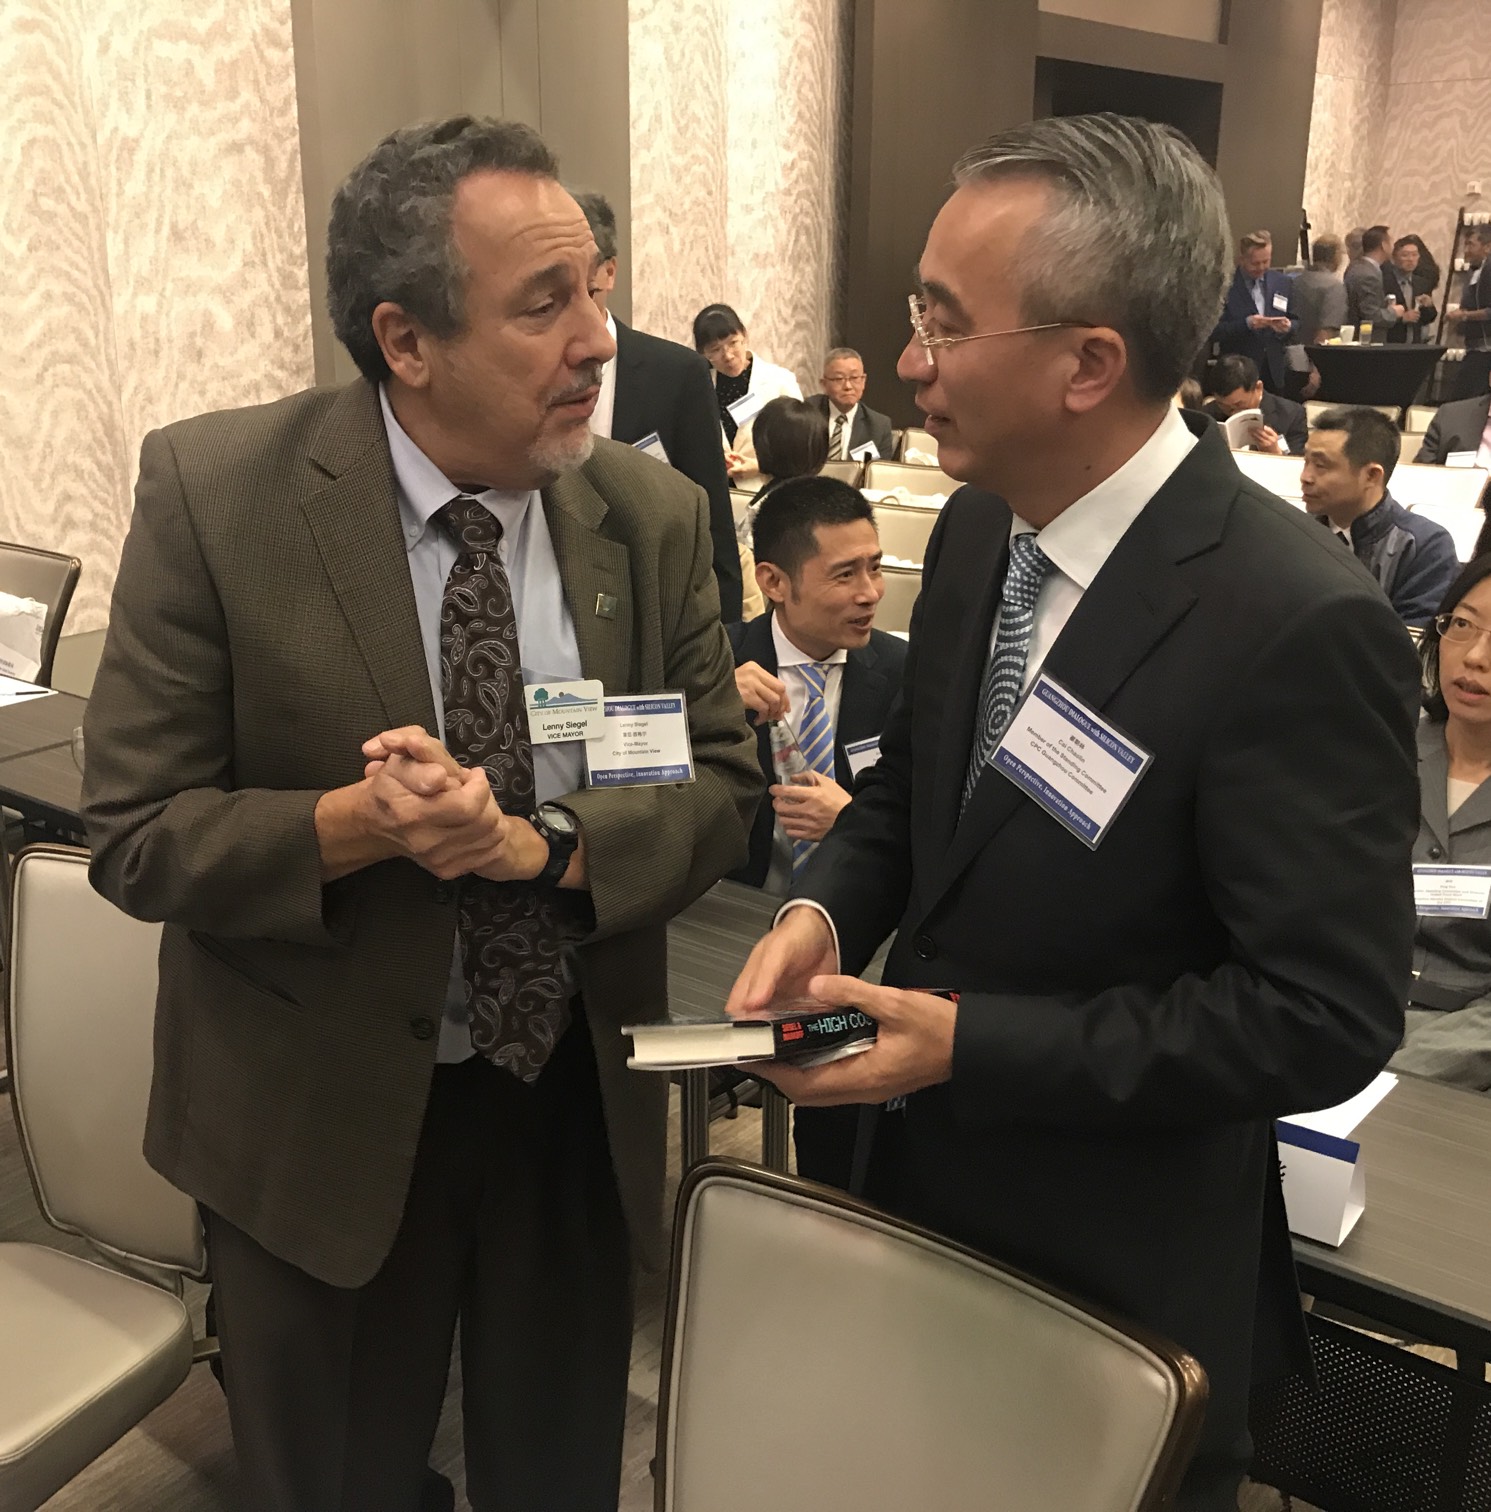 Lenny gives Cai Chaolin, head of the Guangzhou delegation, a copy of his 1985 book, “The High Cost of High Tech," co-authored by John Markoff.